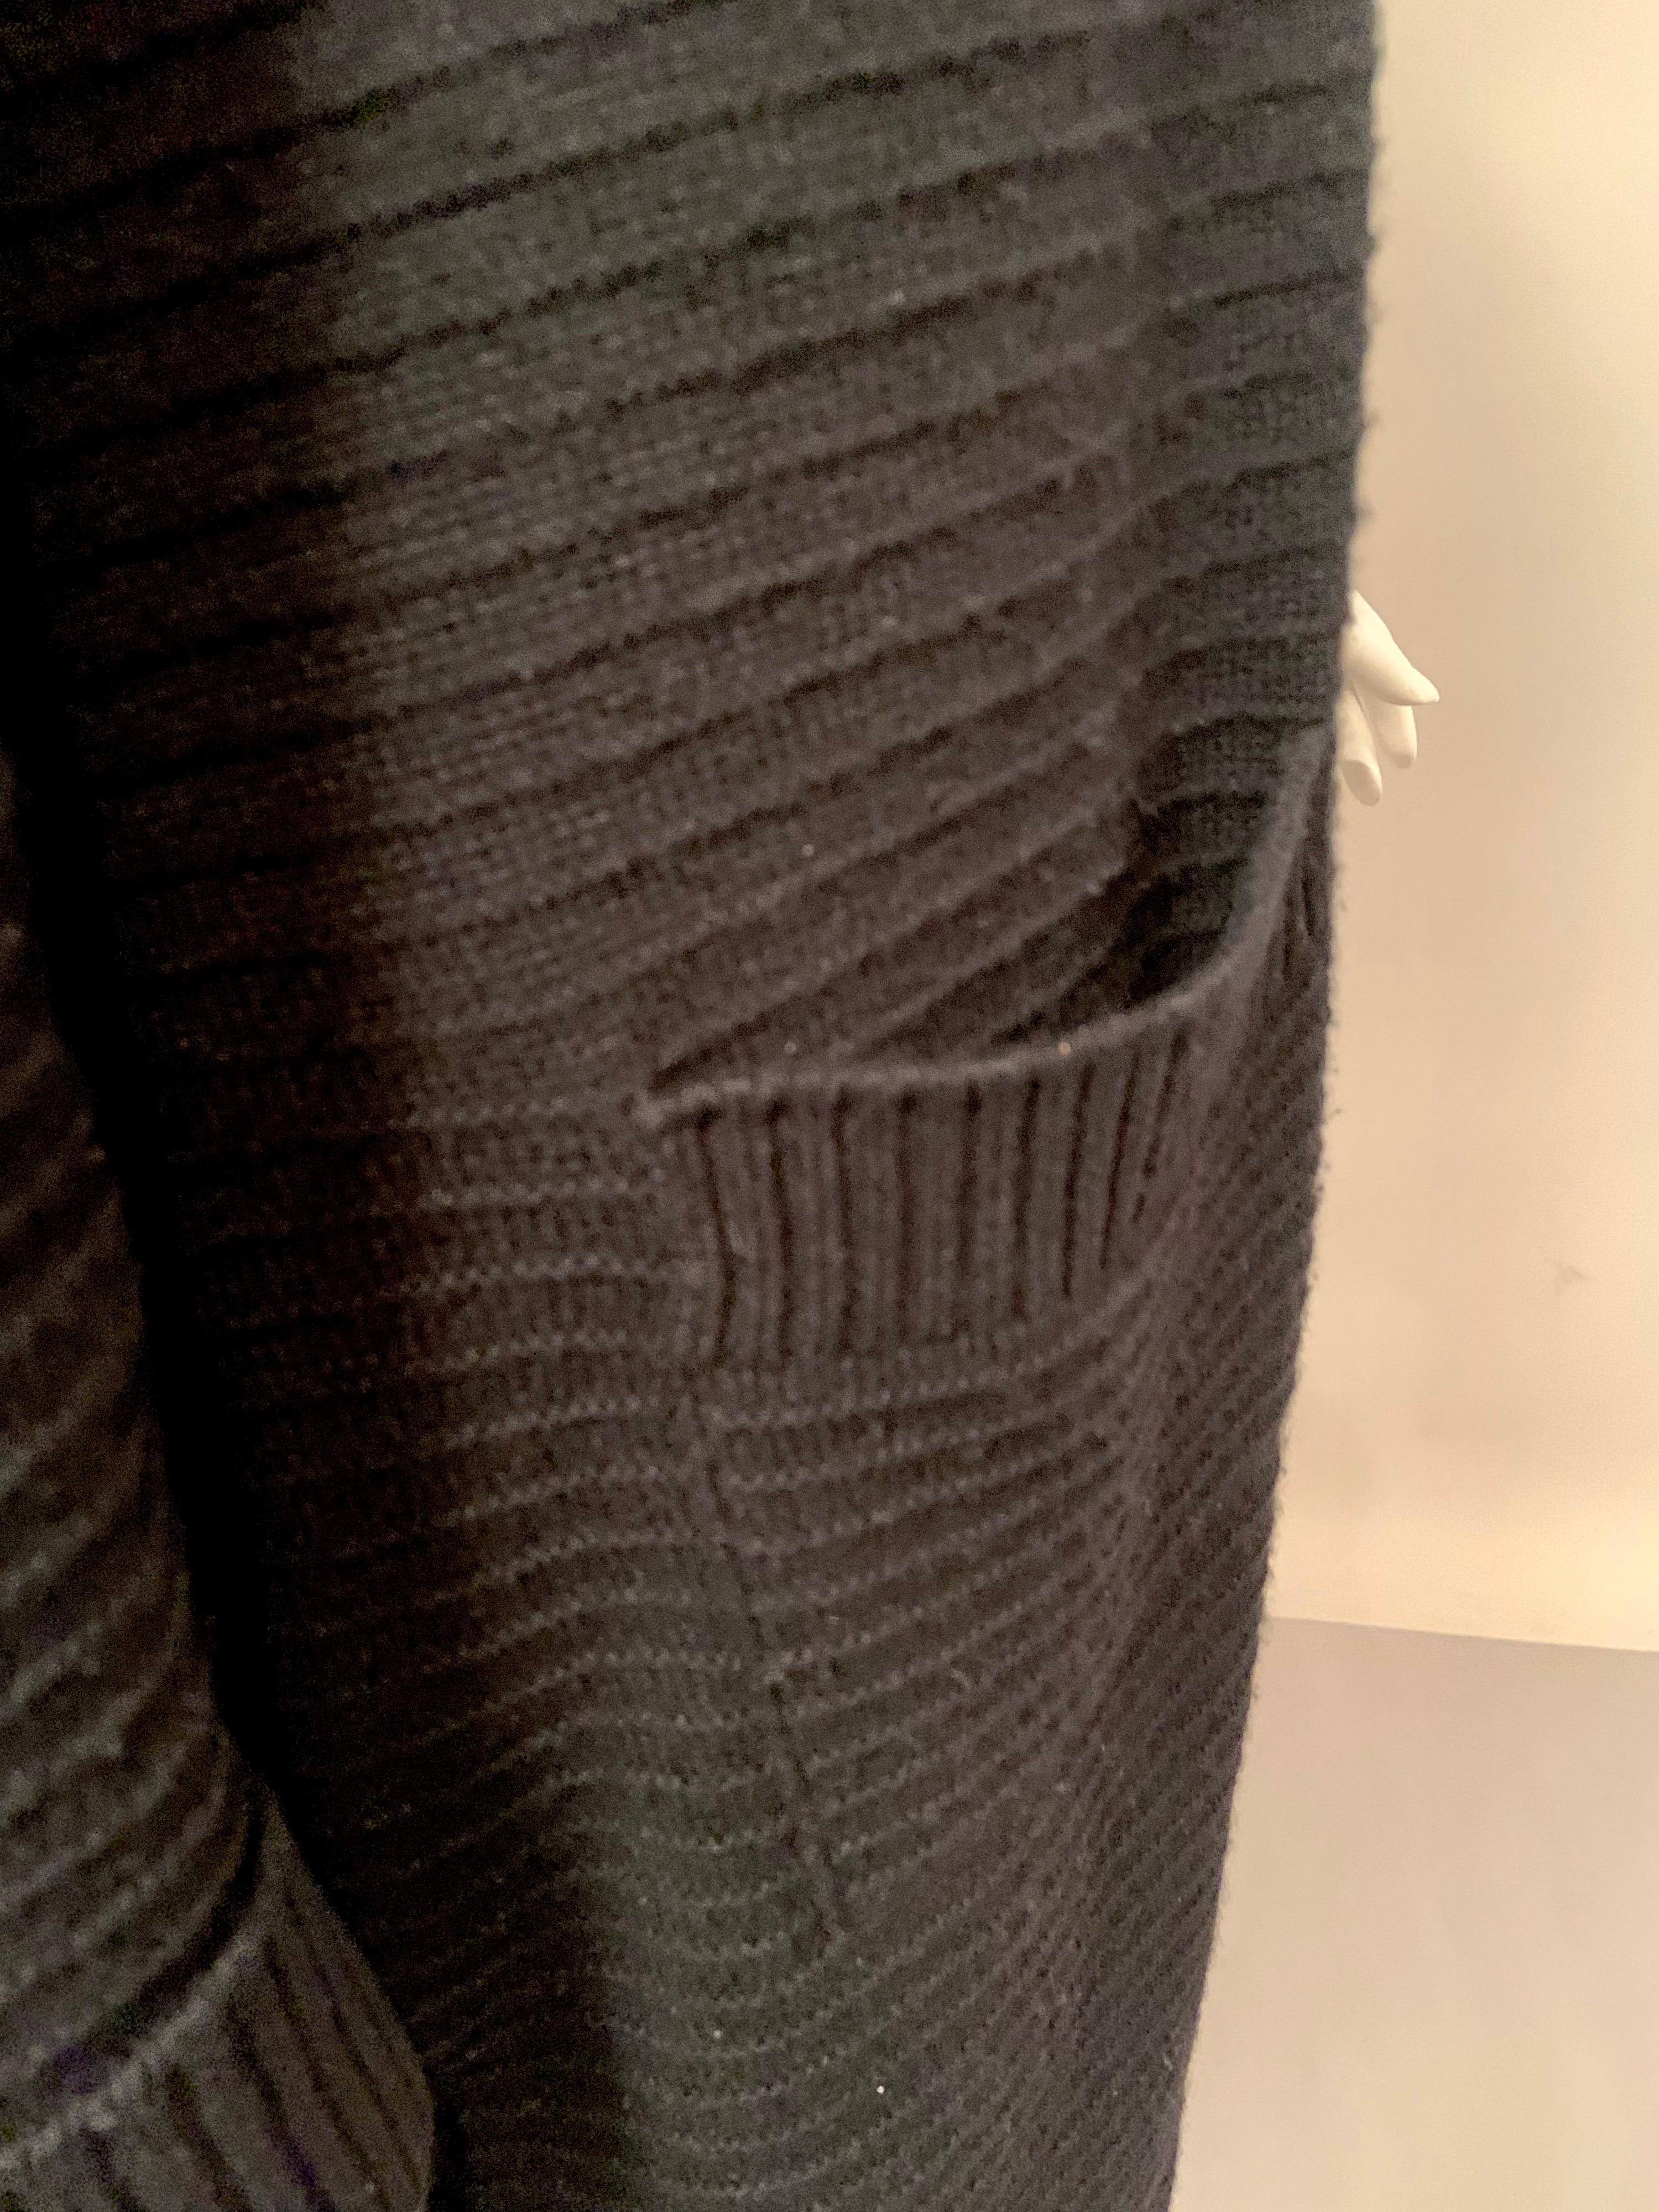 Chanel Black Cashmere Long Cardigan Sweater, Larger Size 5